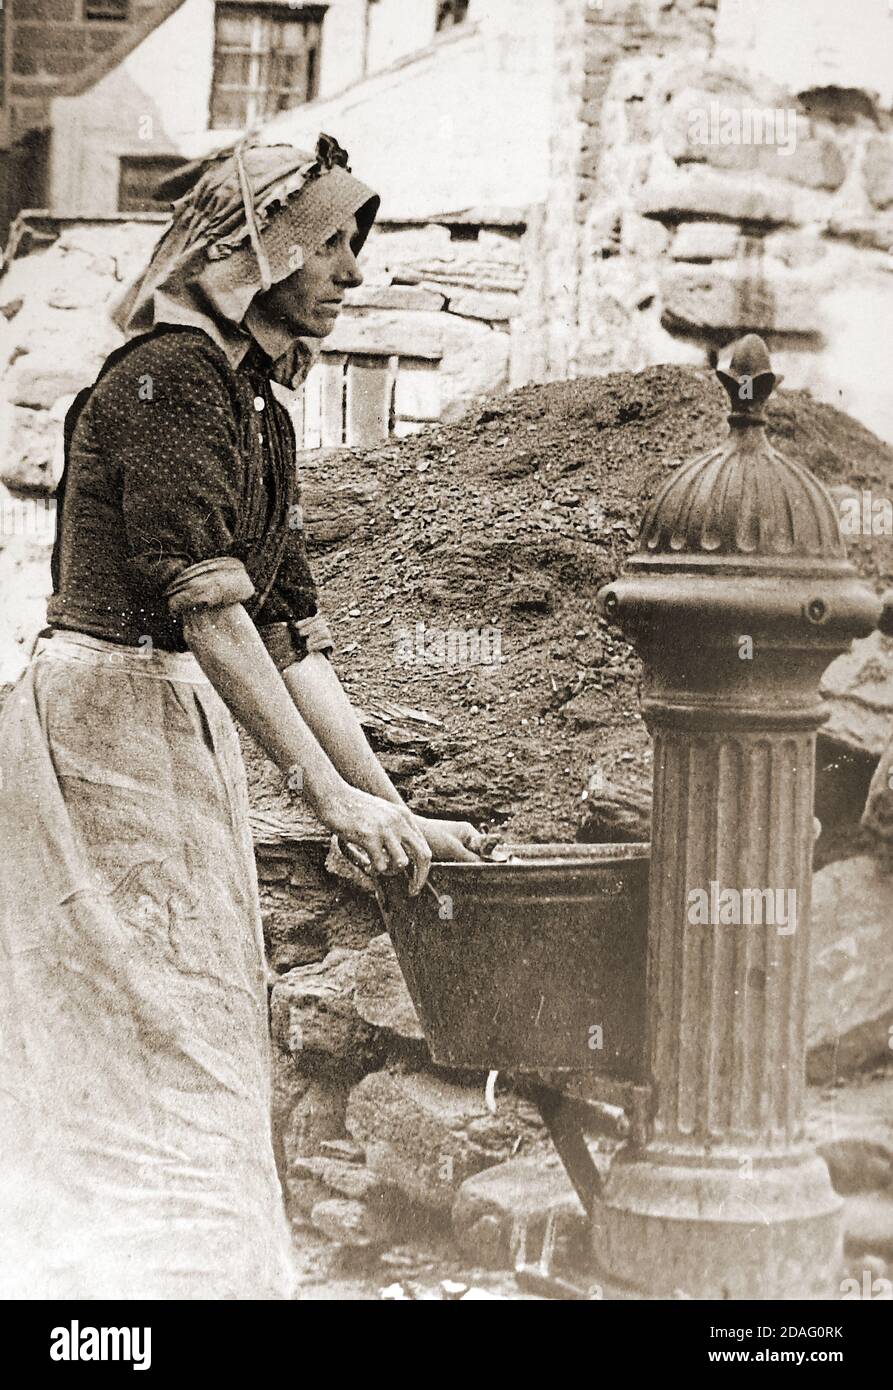 A Victorian photograph of a Woman collecting water at the Cragg Pump, Whitby, North Yorkshire in the late 1800s. Steps led down from the pump onto Pier road where fishwives would 'gip' or gut herrings as they arrived on the quay directly from the fishing boats. The pump was then the only source of fresh water in the area. The headress she is wearing is known as a 'Steerths' Bonnet, Taking its name from the village of Staithes where they were manufactured, though they were widely worn amongst the fishing communities elsewhere. Stock Photo